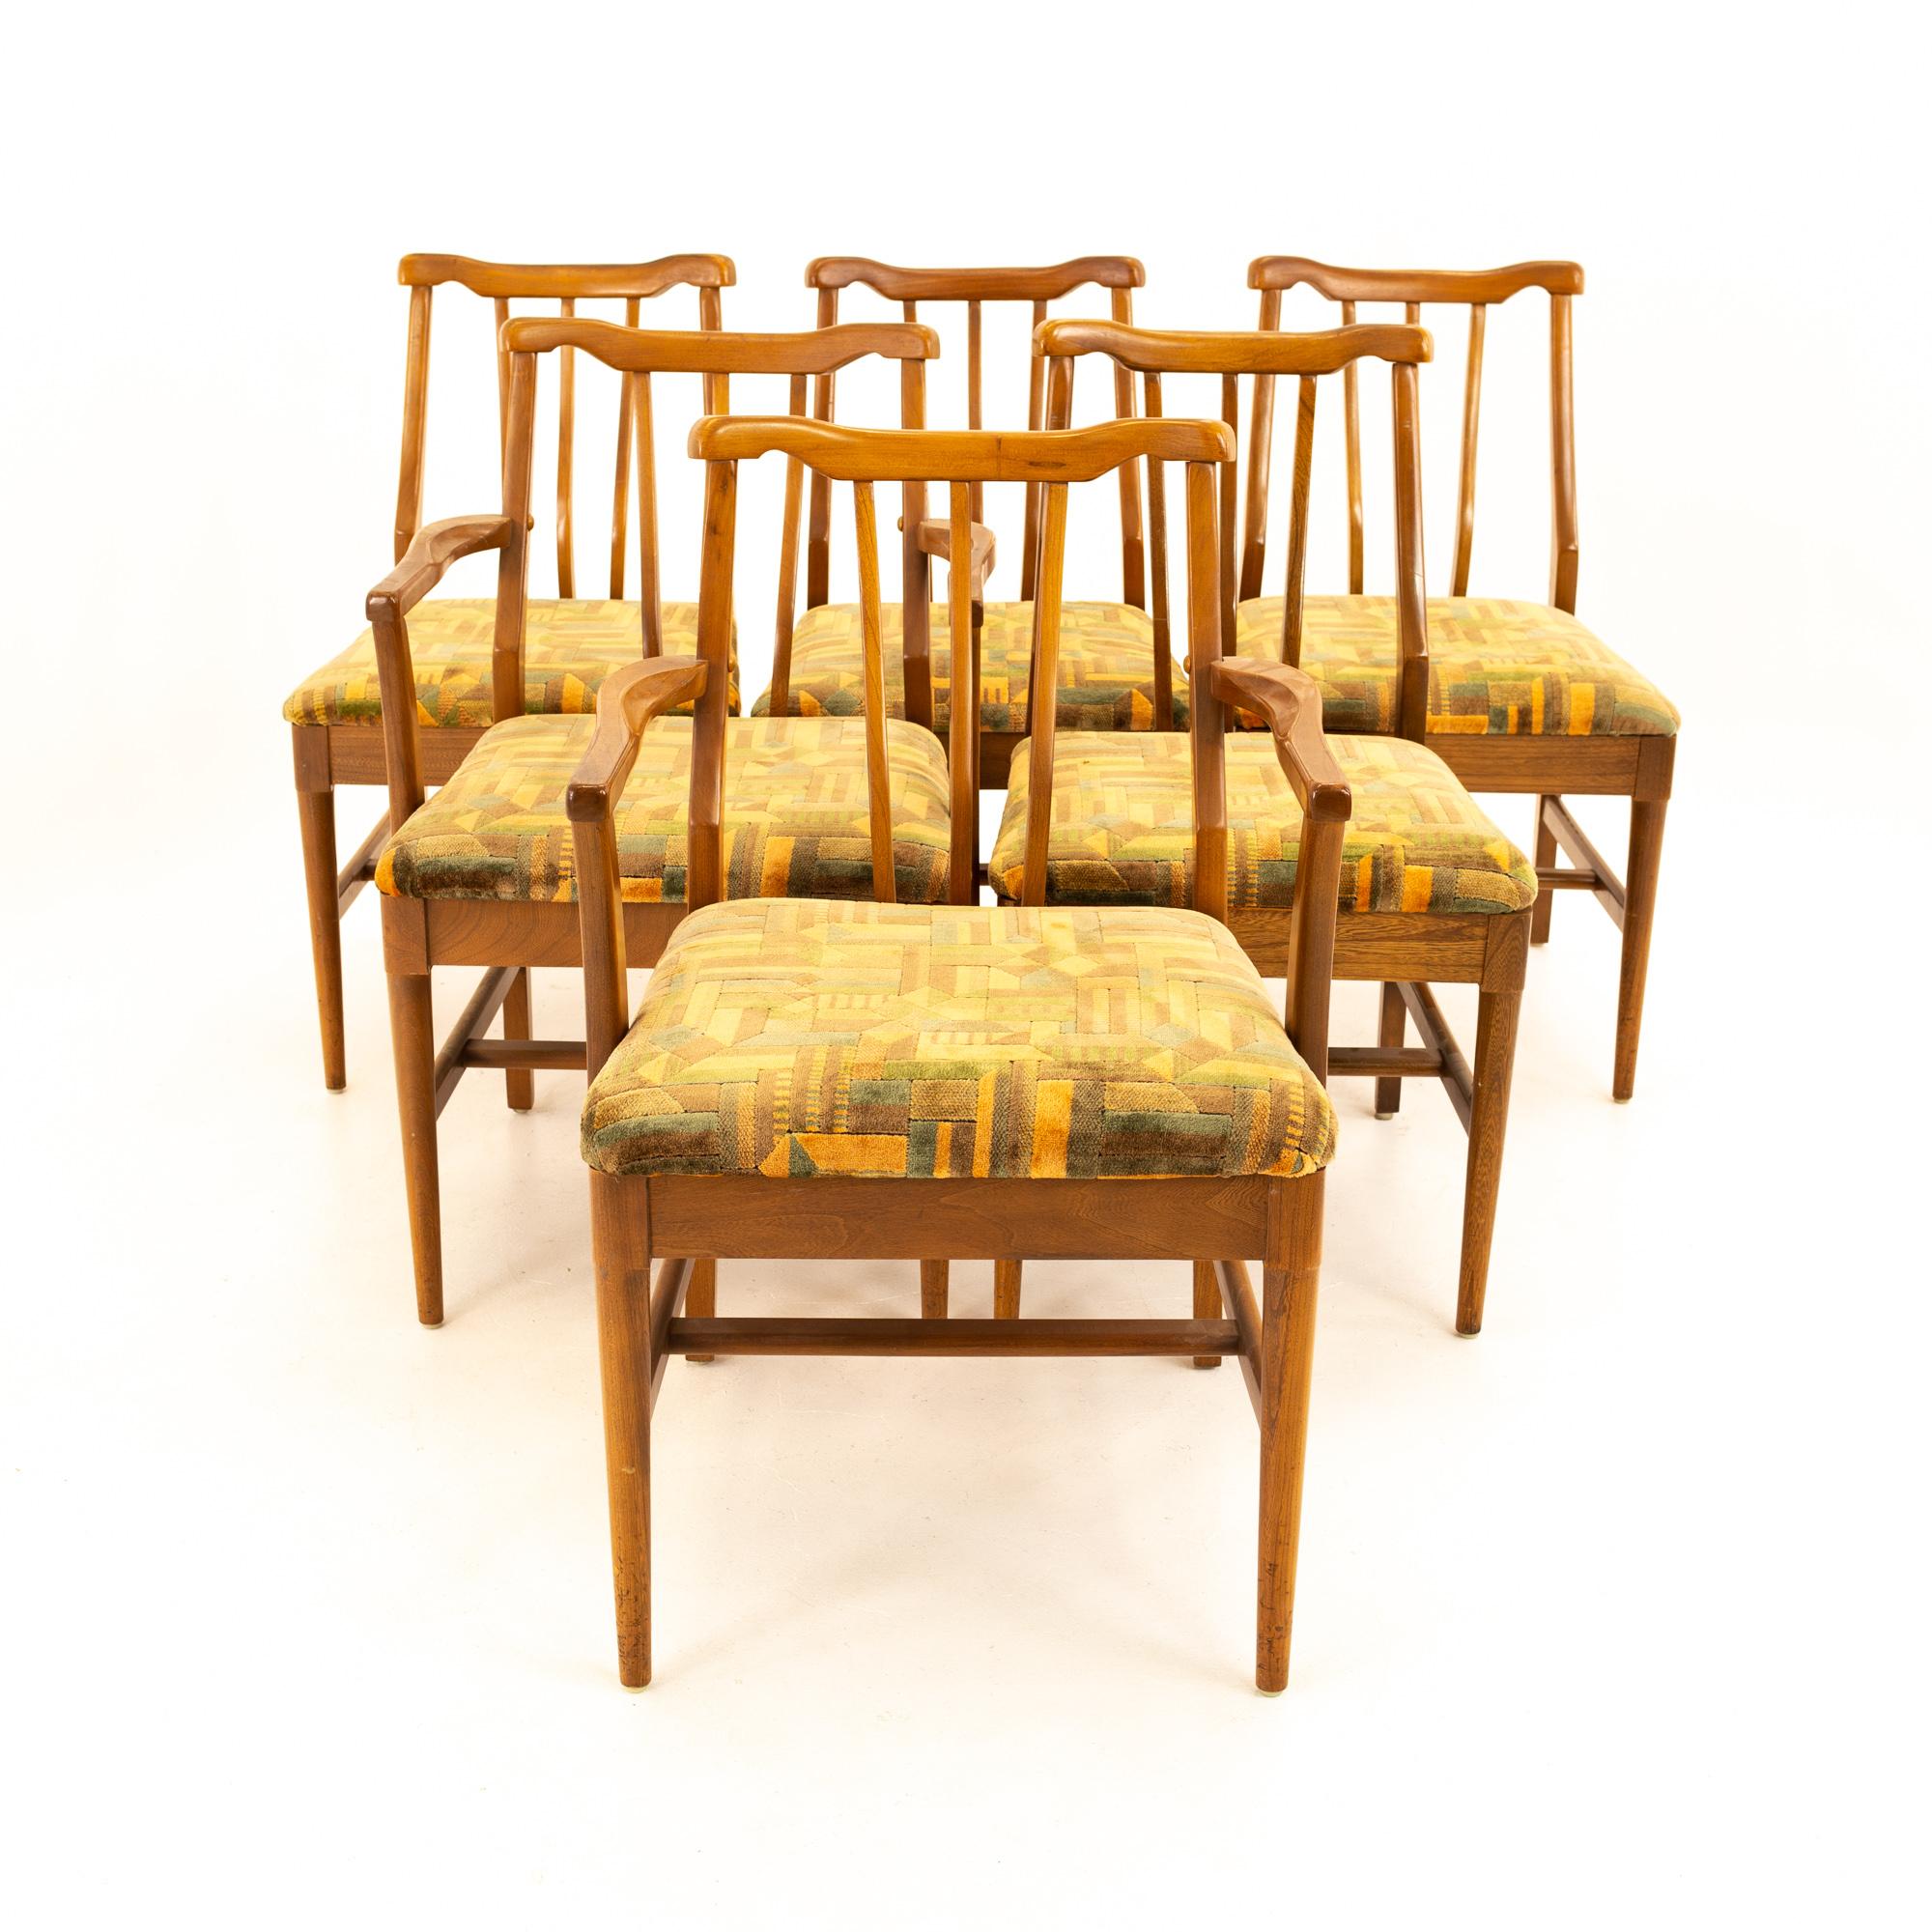 Jack Lenor Larsen style Mid Century walnut dining chairs - Set of 6
Each chair measures: 19 wide x 19 deep x 32, with a seat height of 18 inches


All pieces of furniture can be had in what we call restored vintage condition. This means the piece is